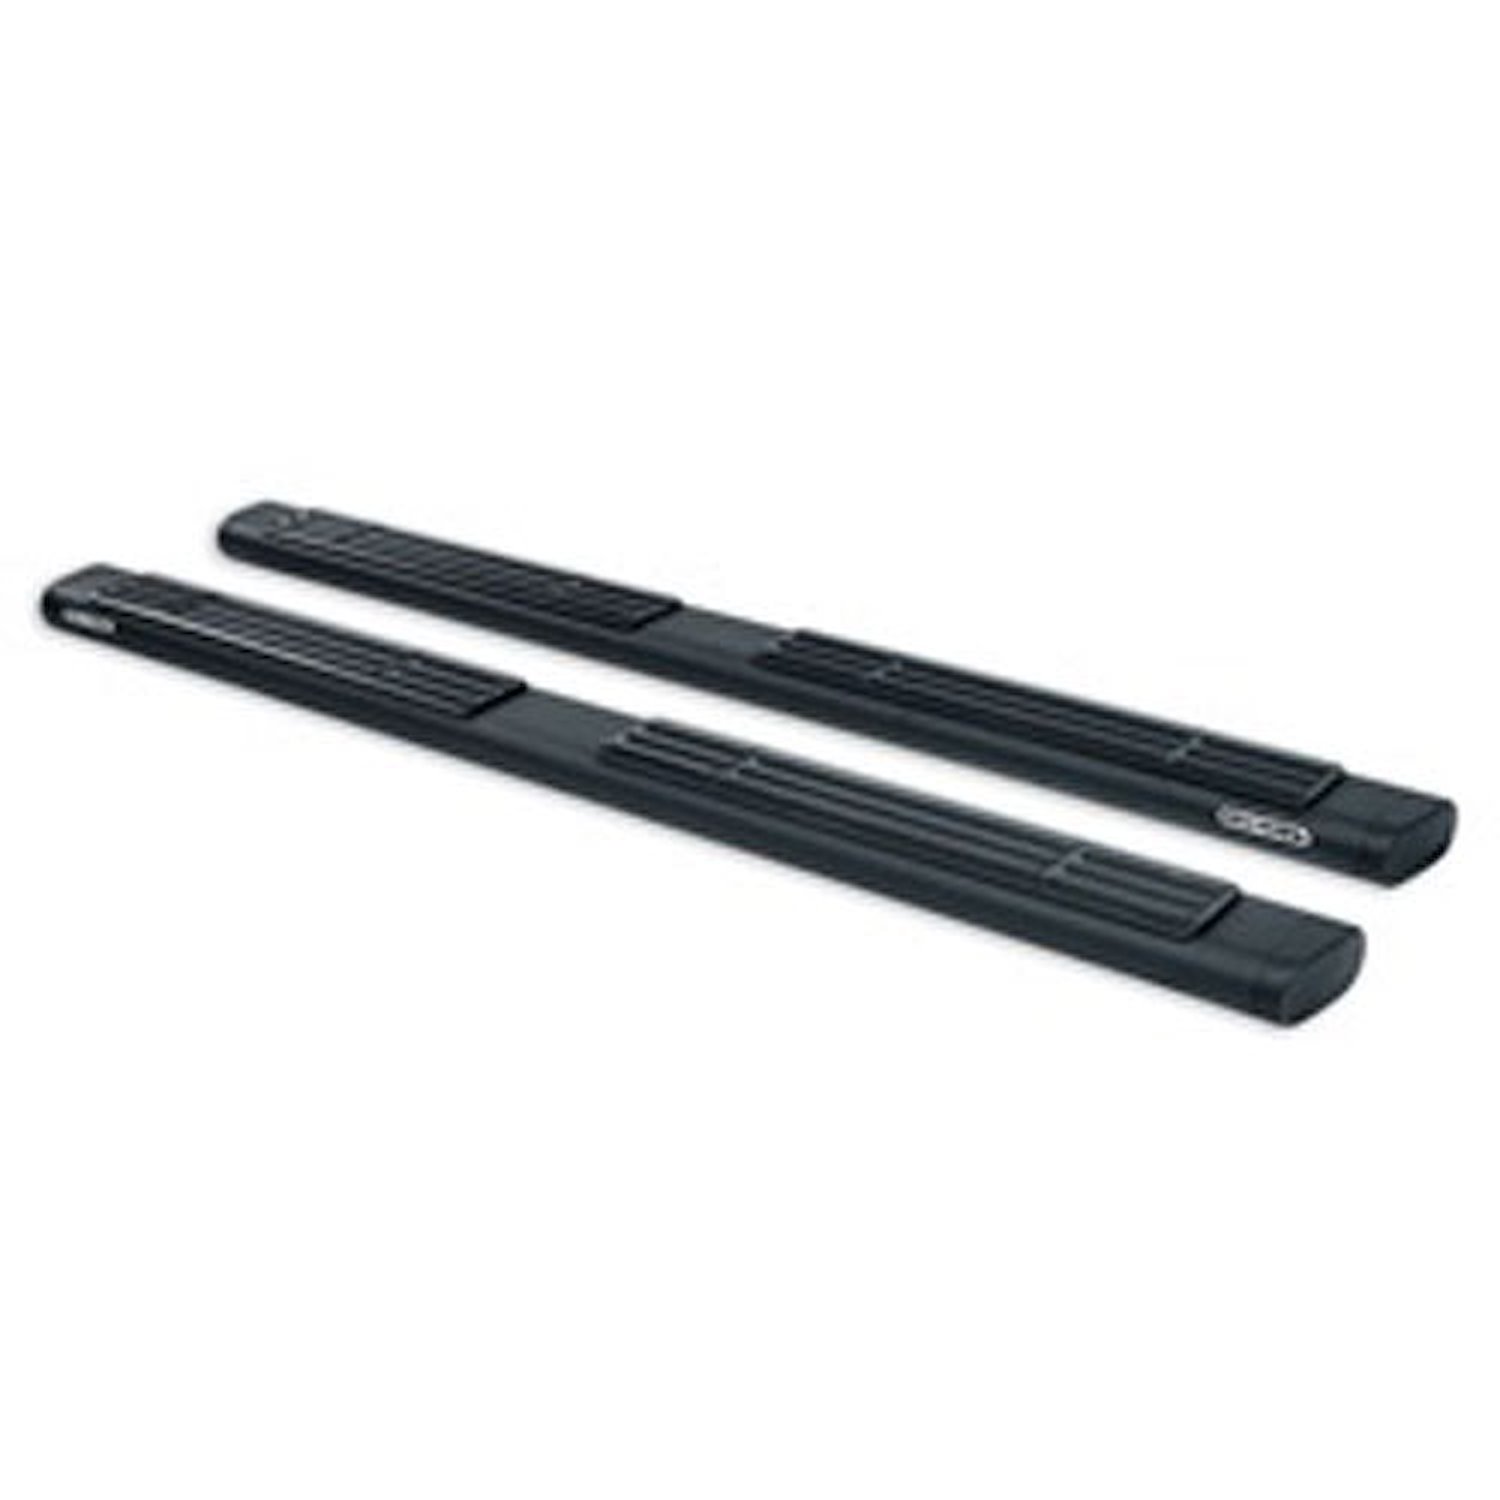 6 OE Xtreme SideSteps Mounting brackets sold separately -